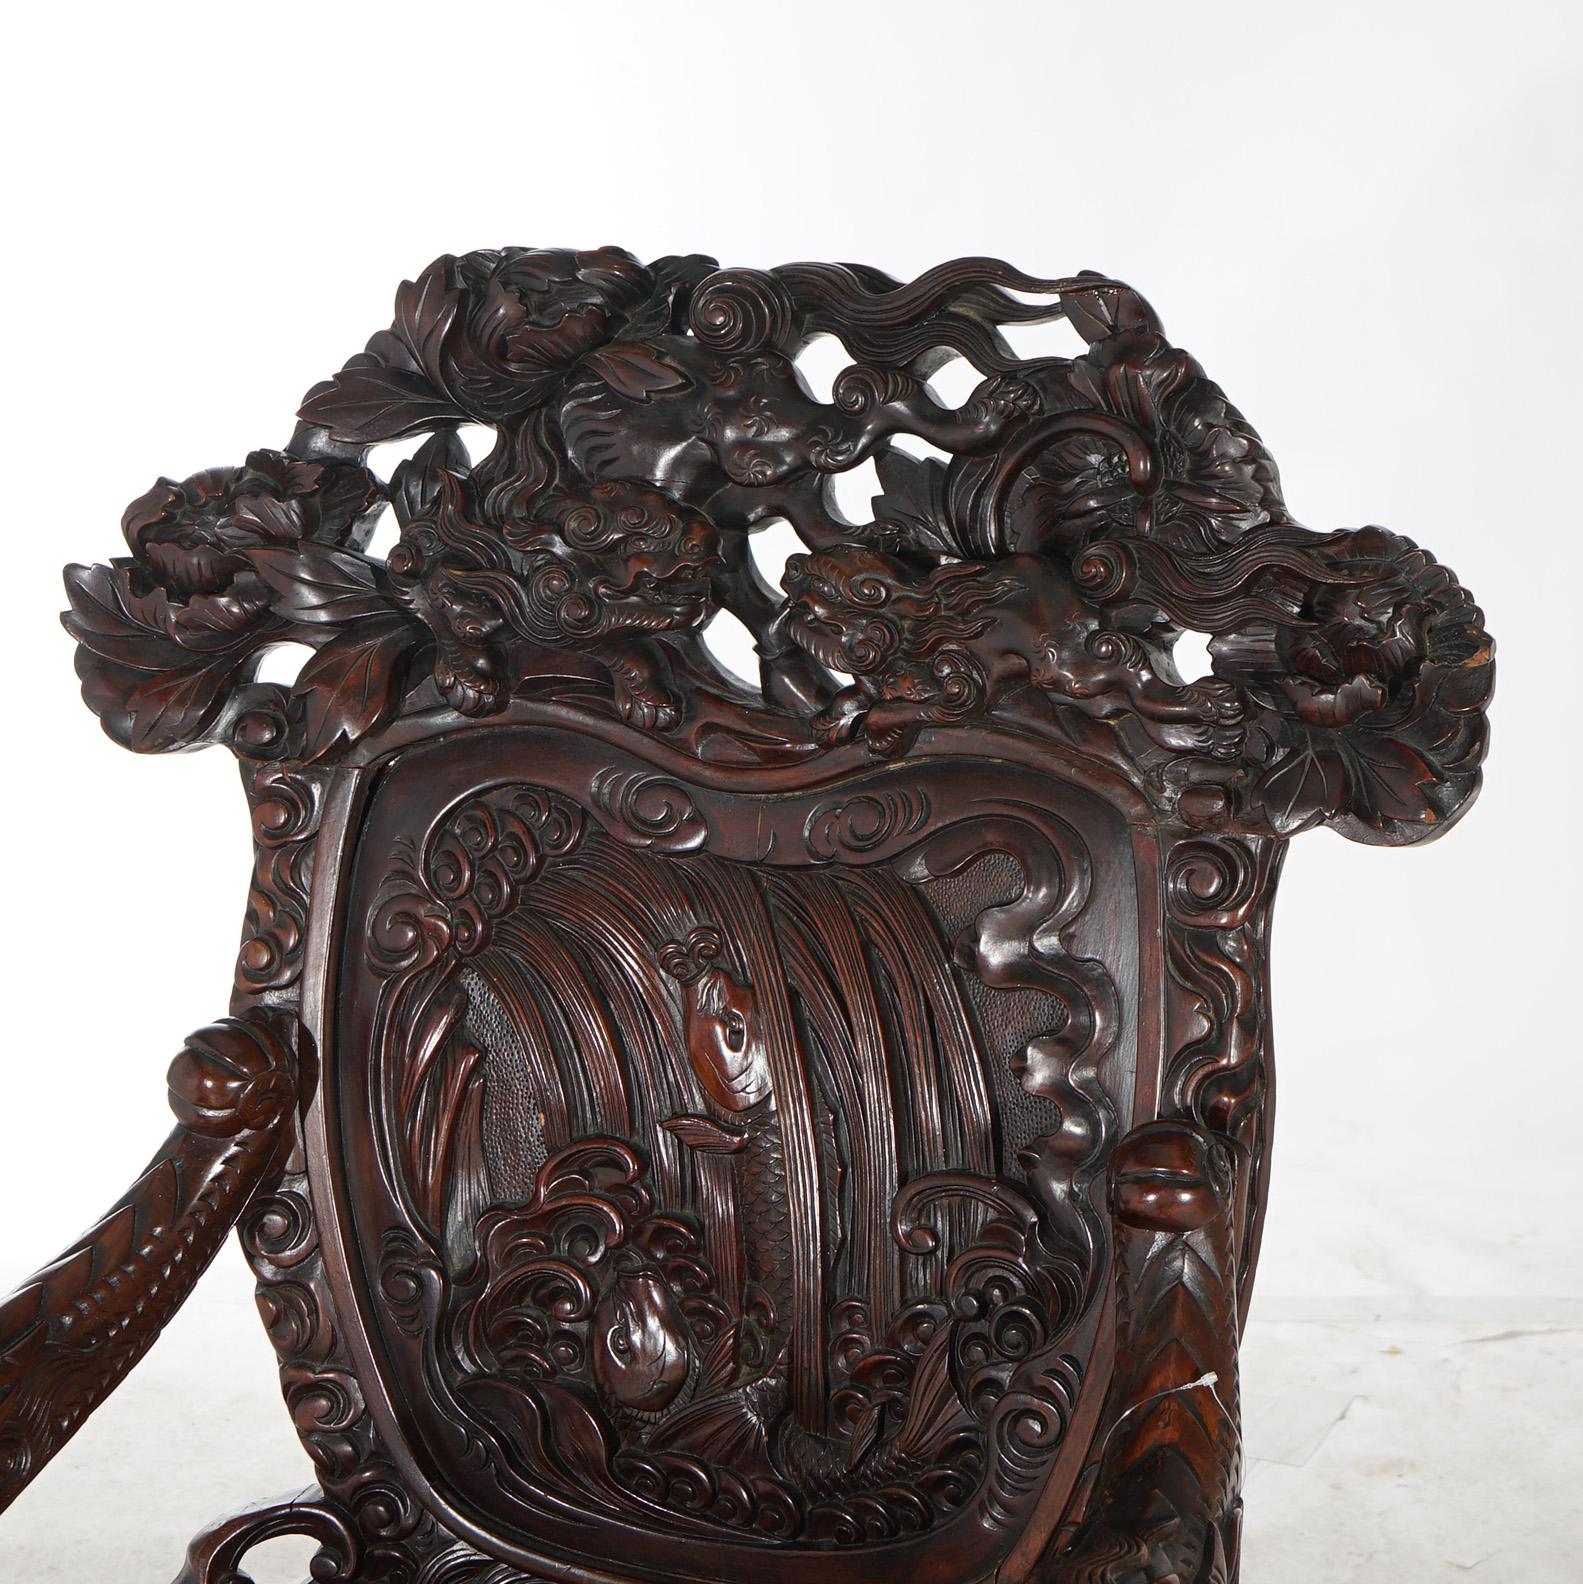 Antique Chinese Deep Carved Rosewood Figural King Throne Chair with Dragons 1920 For Sale 2